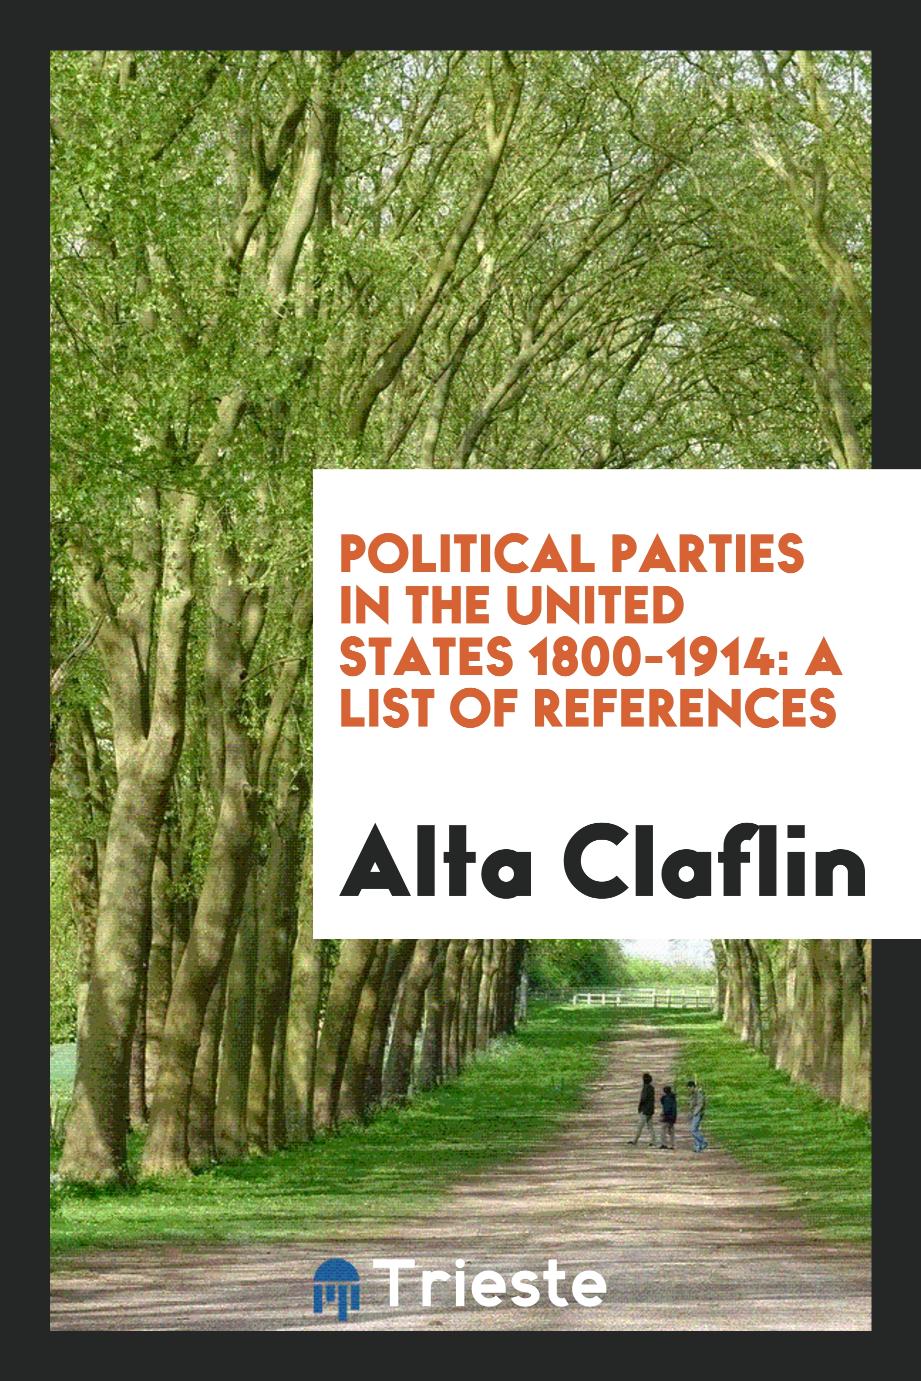 Political Parties in the United States 1800-1914: A List of References